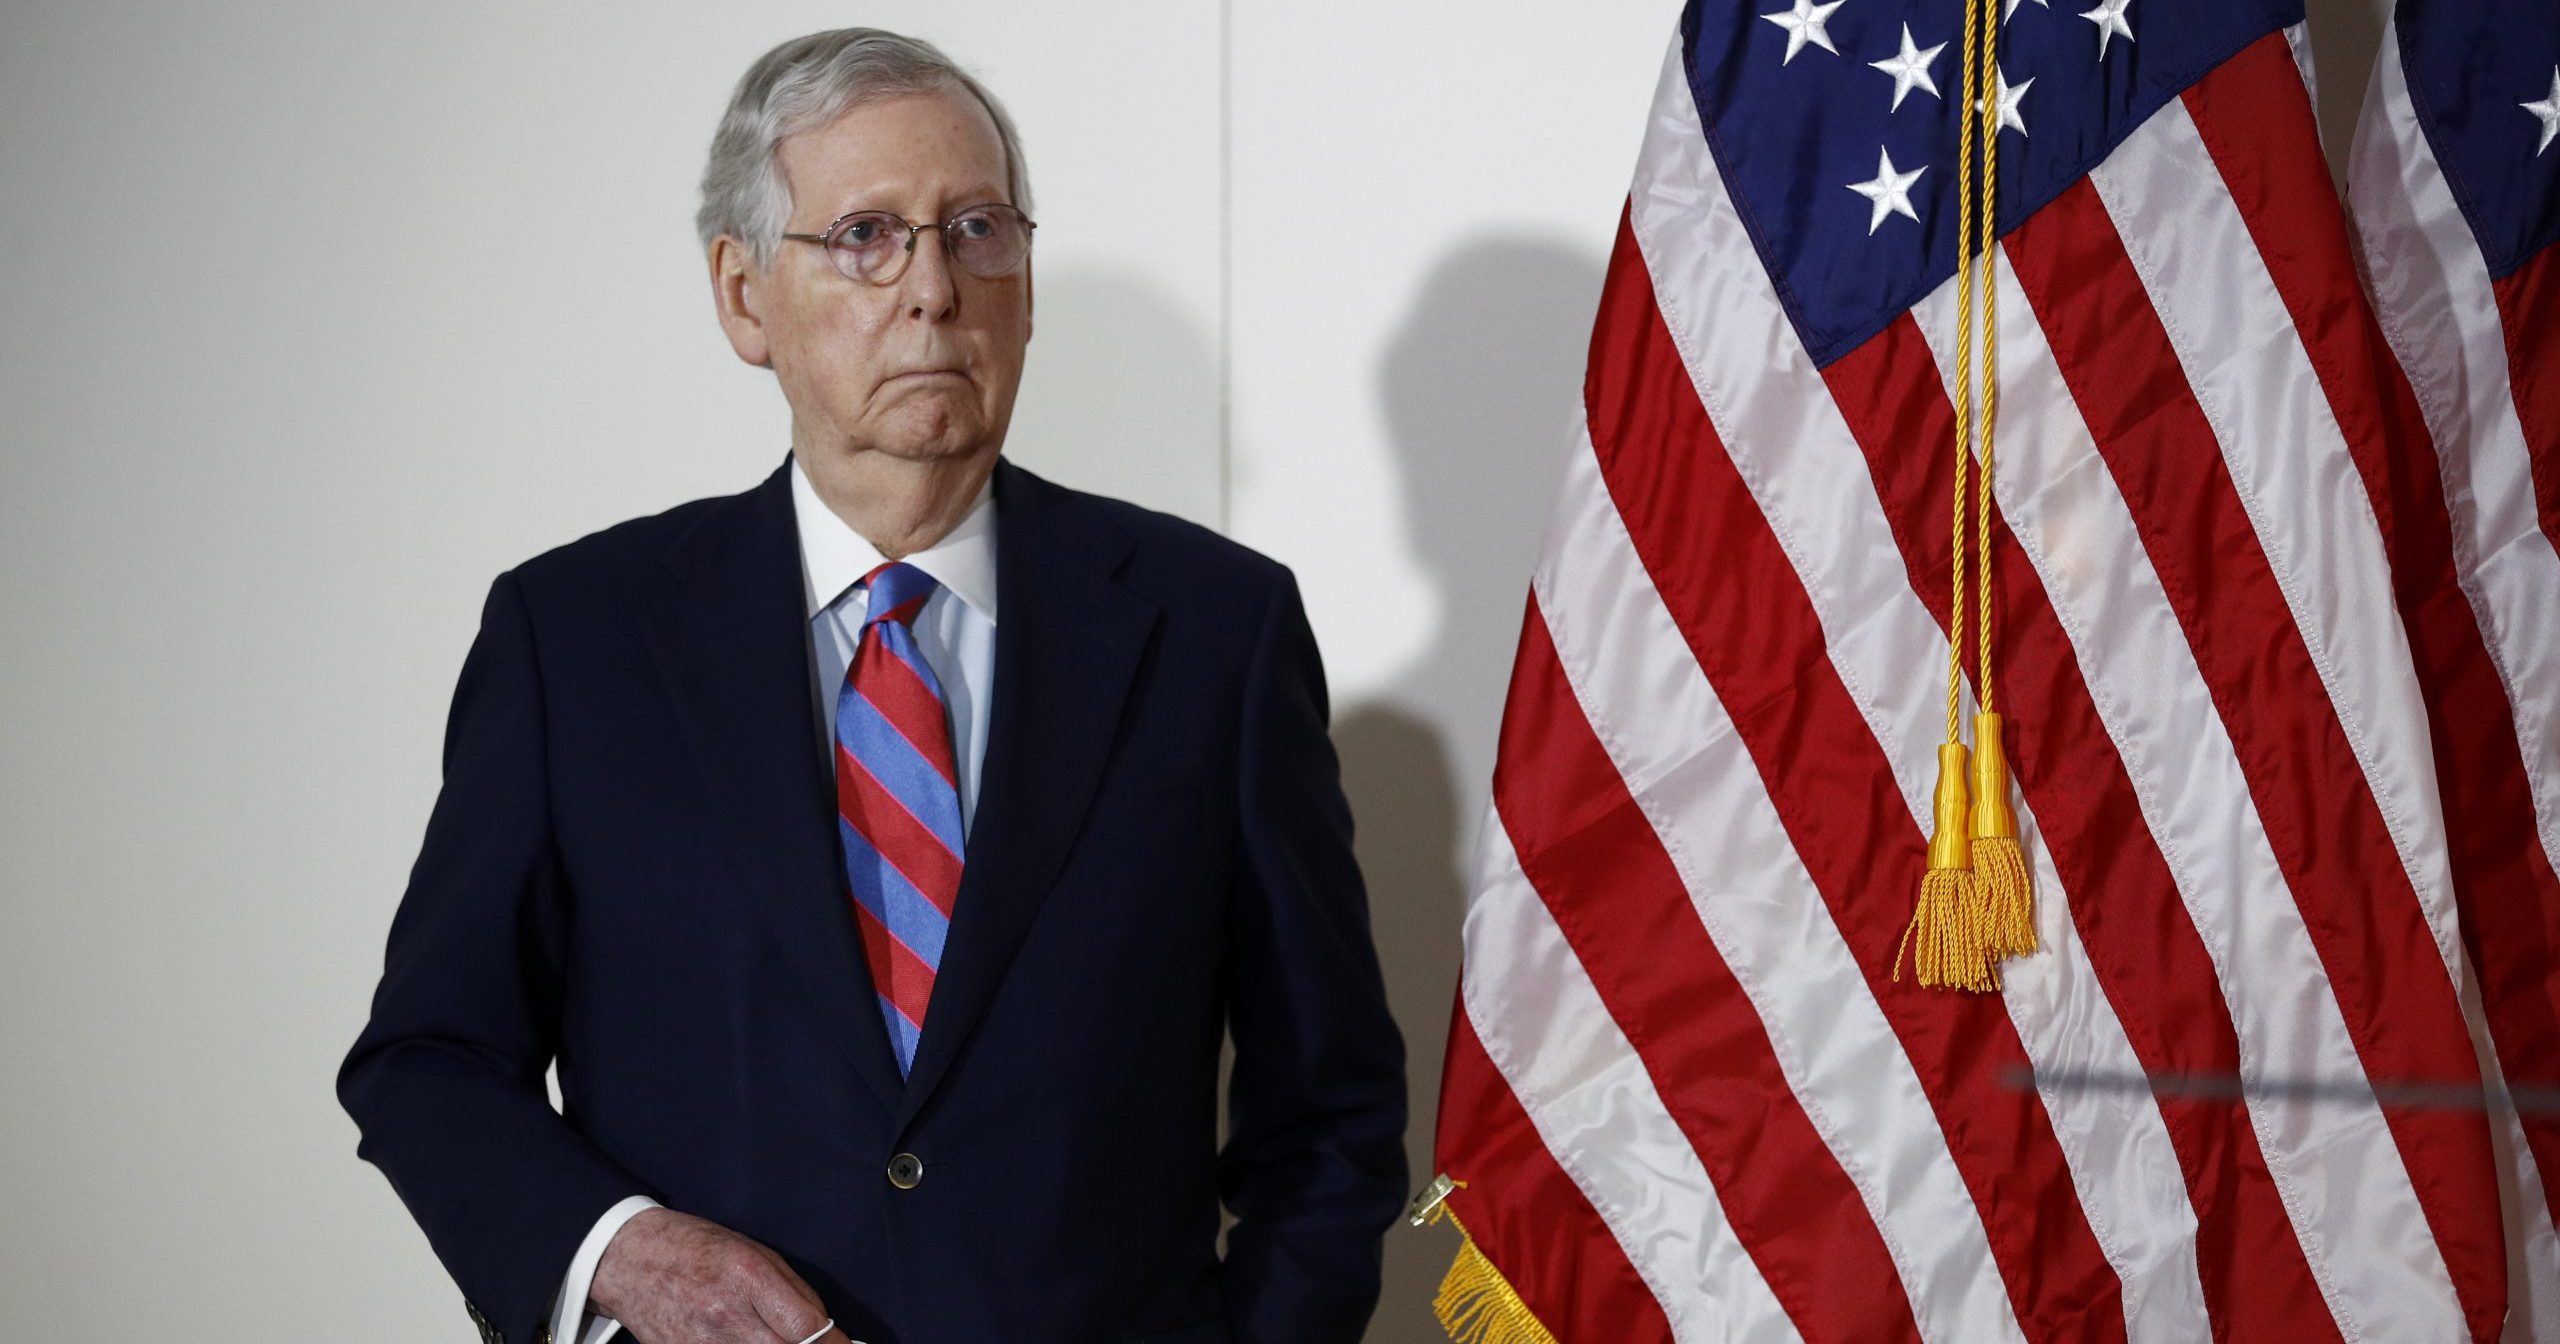 Senate Majority Leader Mitch McConnell of Kentucky holds a face mask used to protect against the spread of the new coronavirus as he attends a news conference on Capitol Hill in Washington on May 12, 2020.